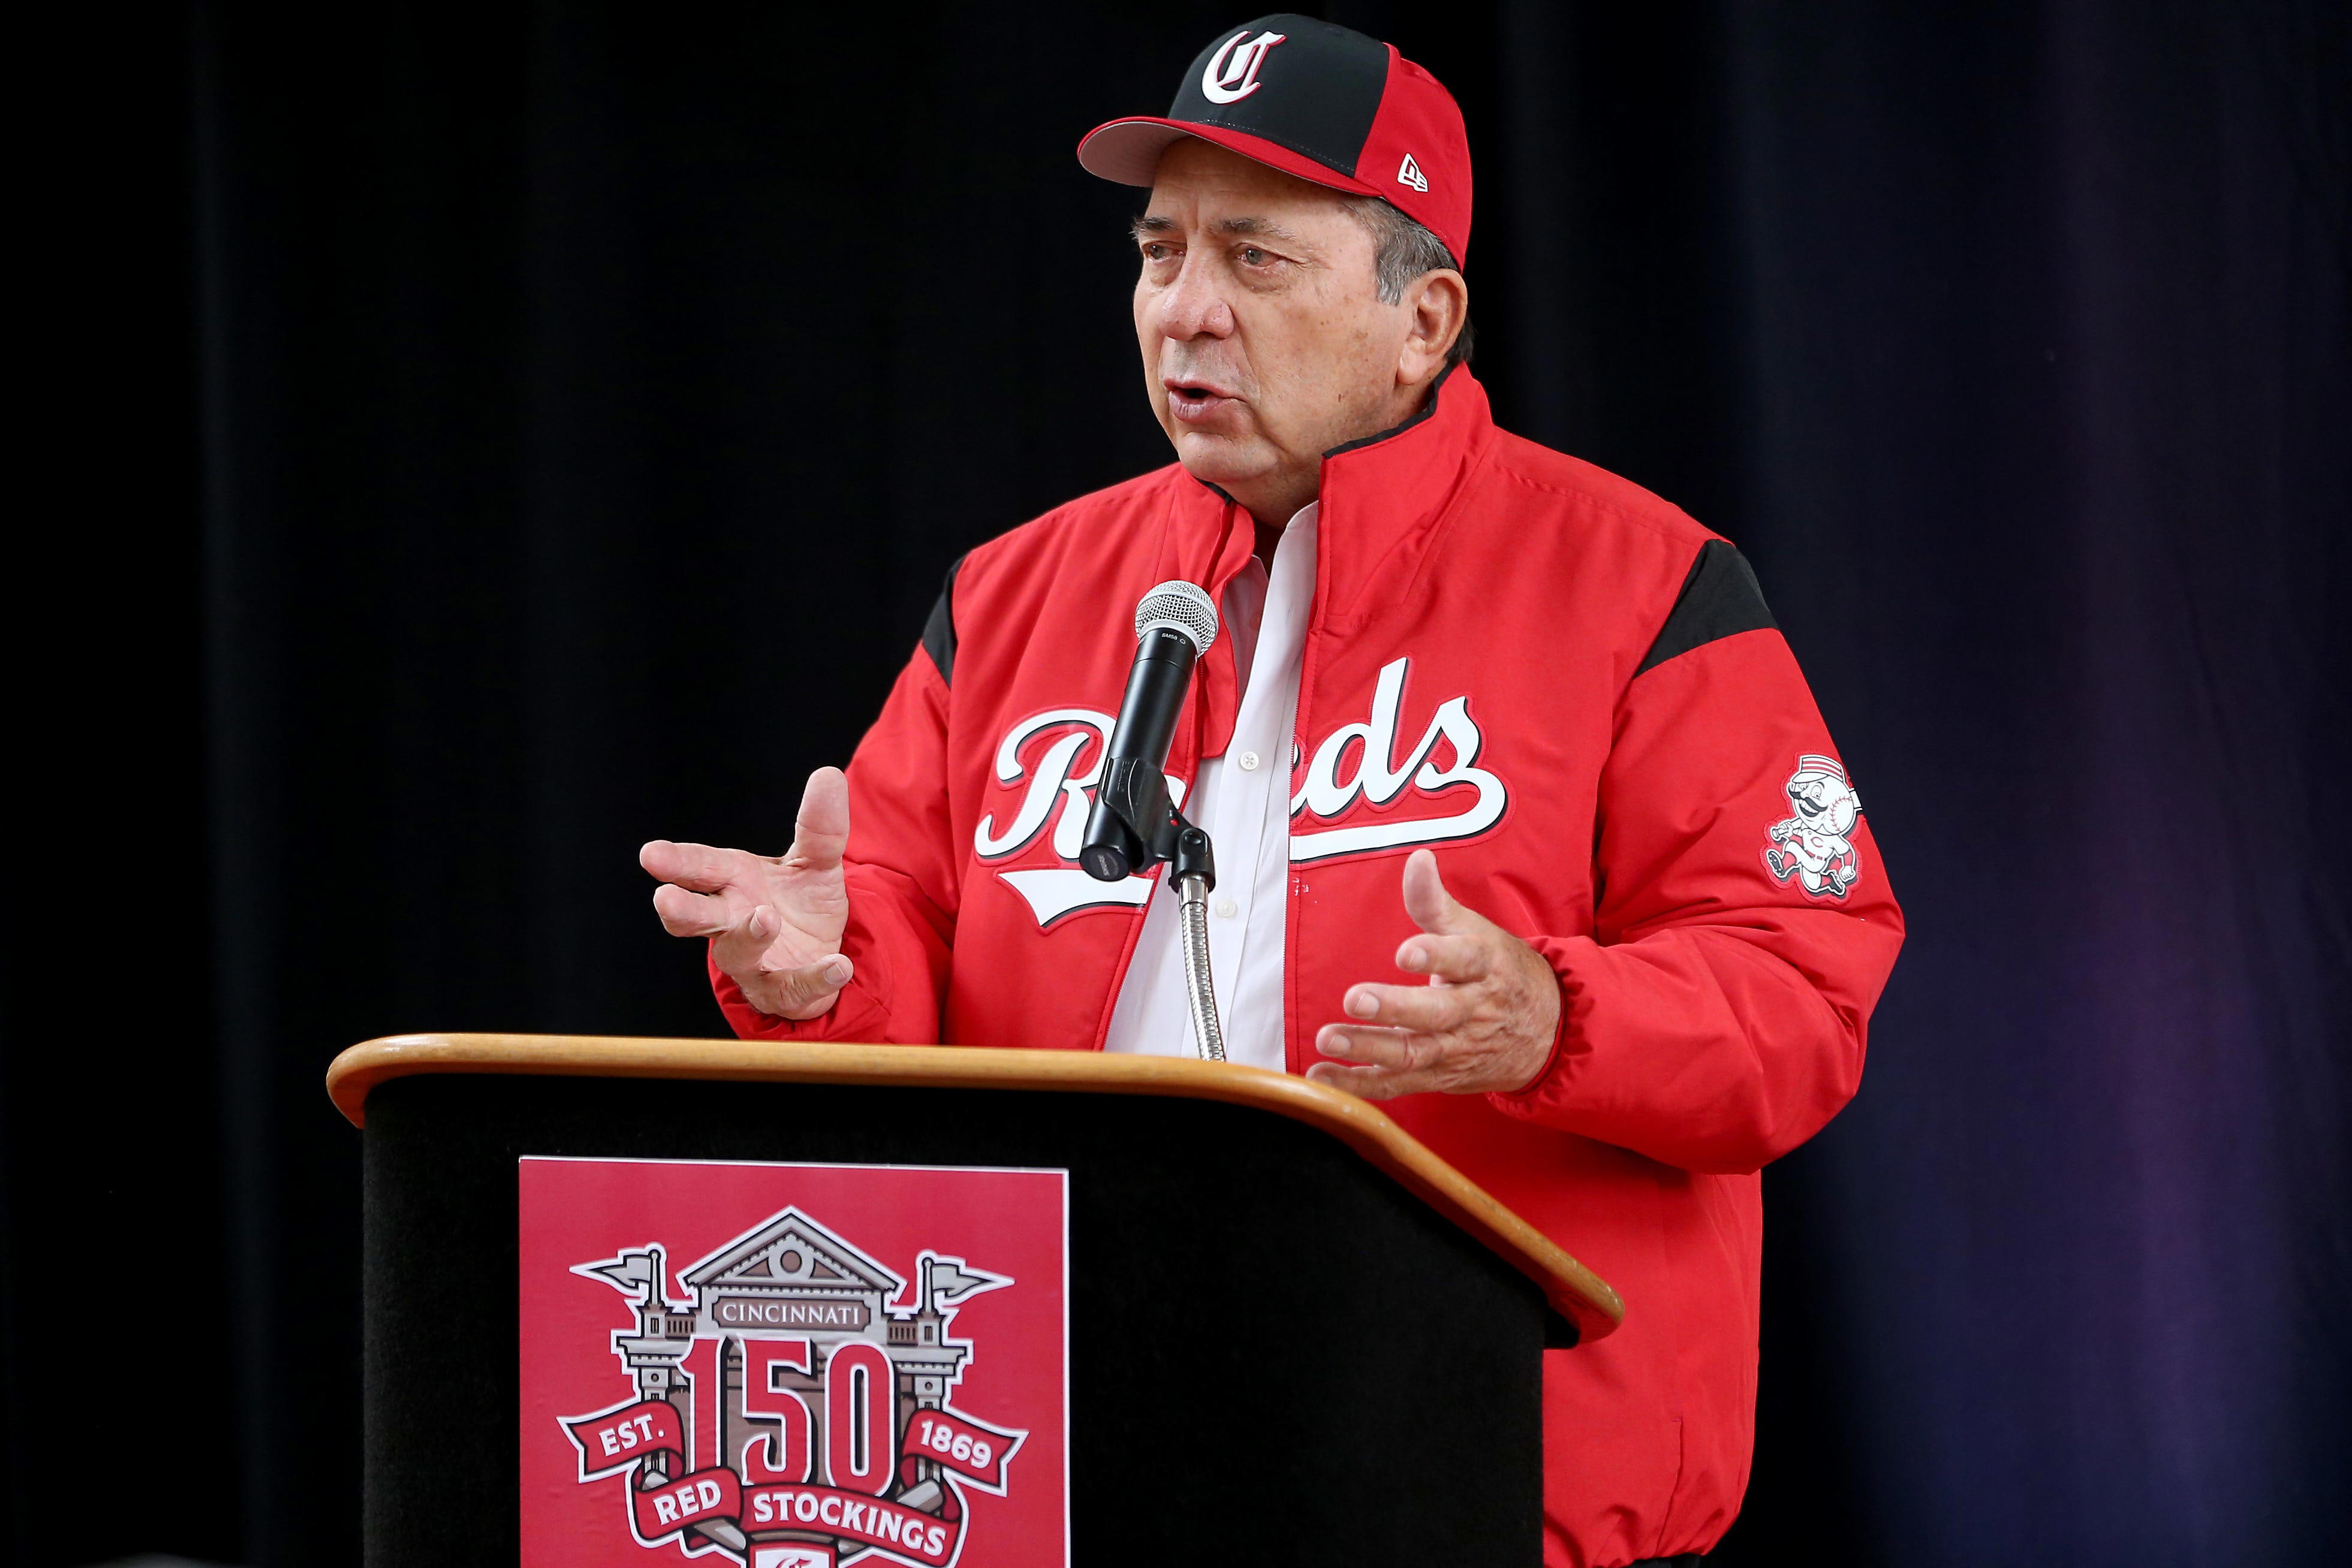 Not in Hall of Fame - 2. Johnny Bench